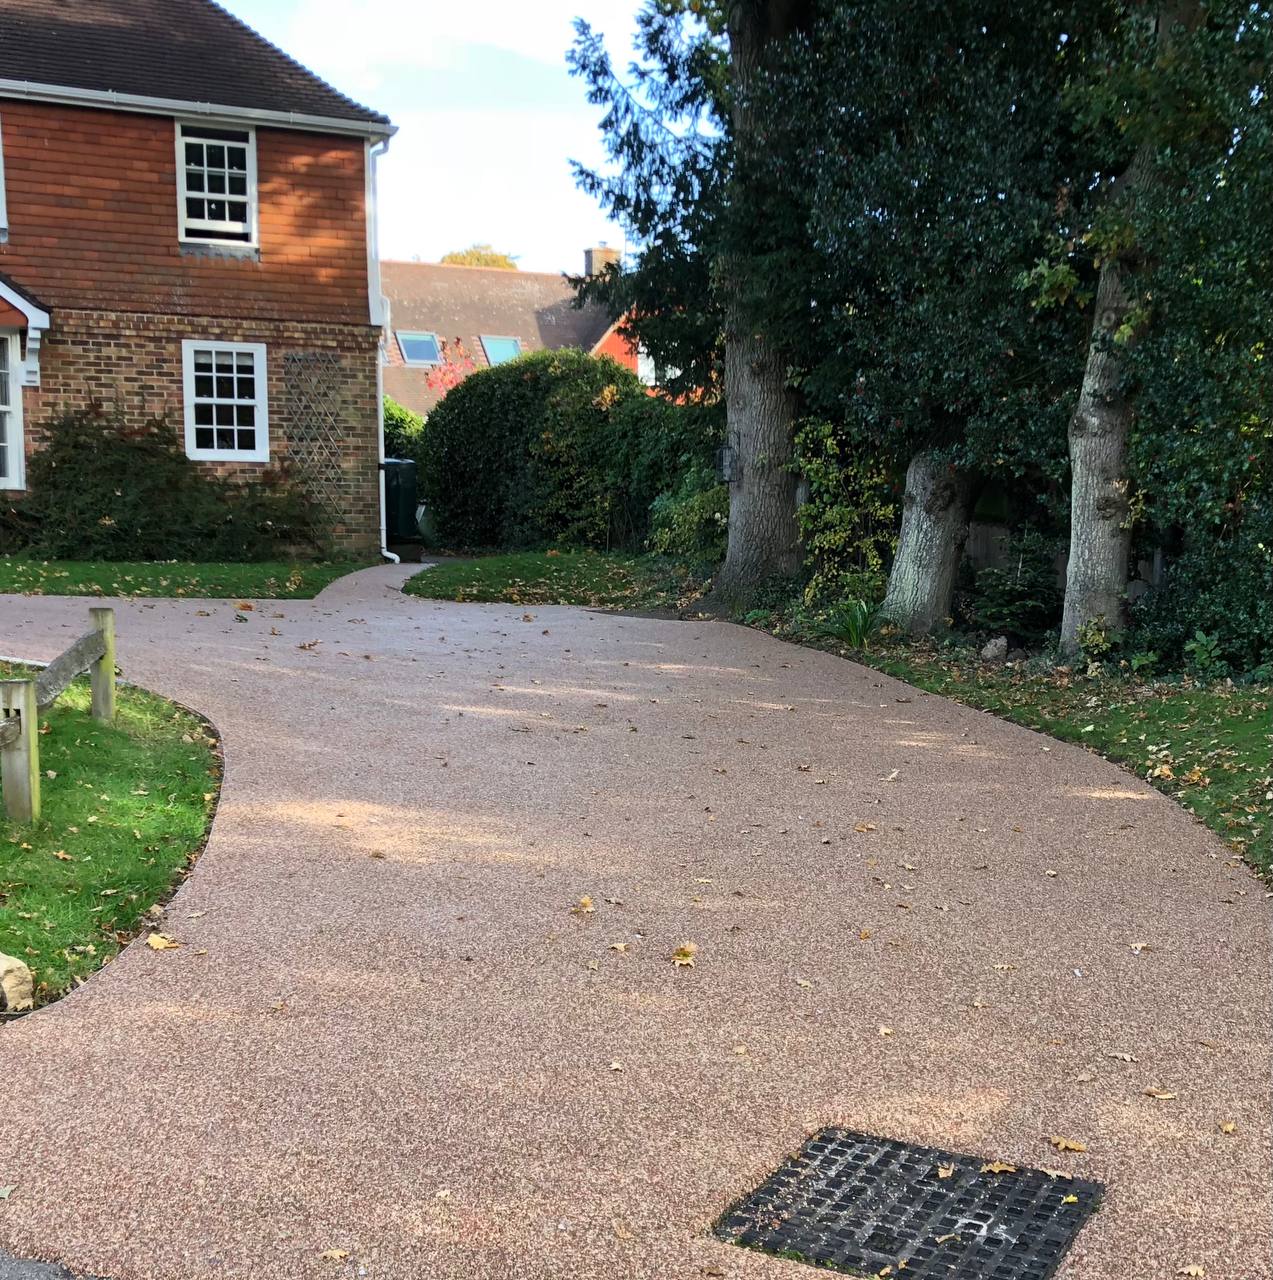 This is a photo of a Resin bound driveway carried out in a district of Cheshire. All works done by Resin Driveways Cheshire